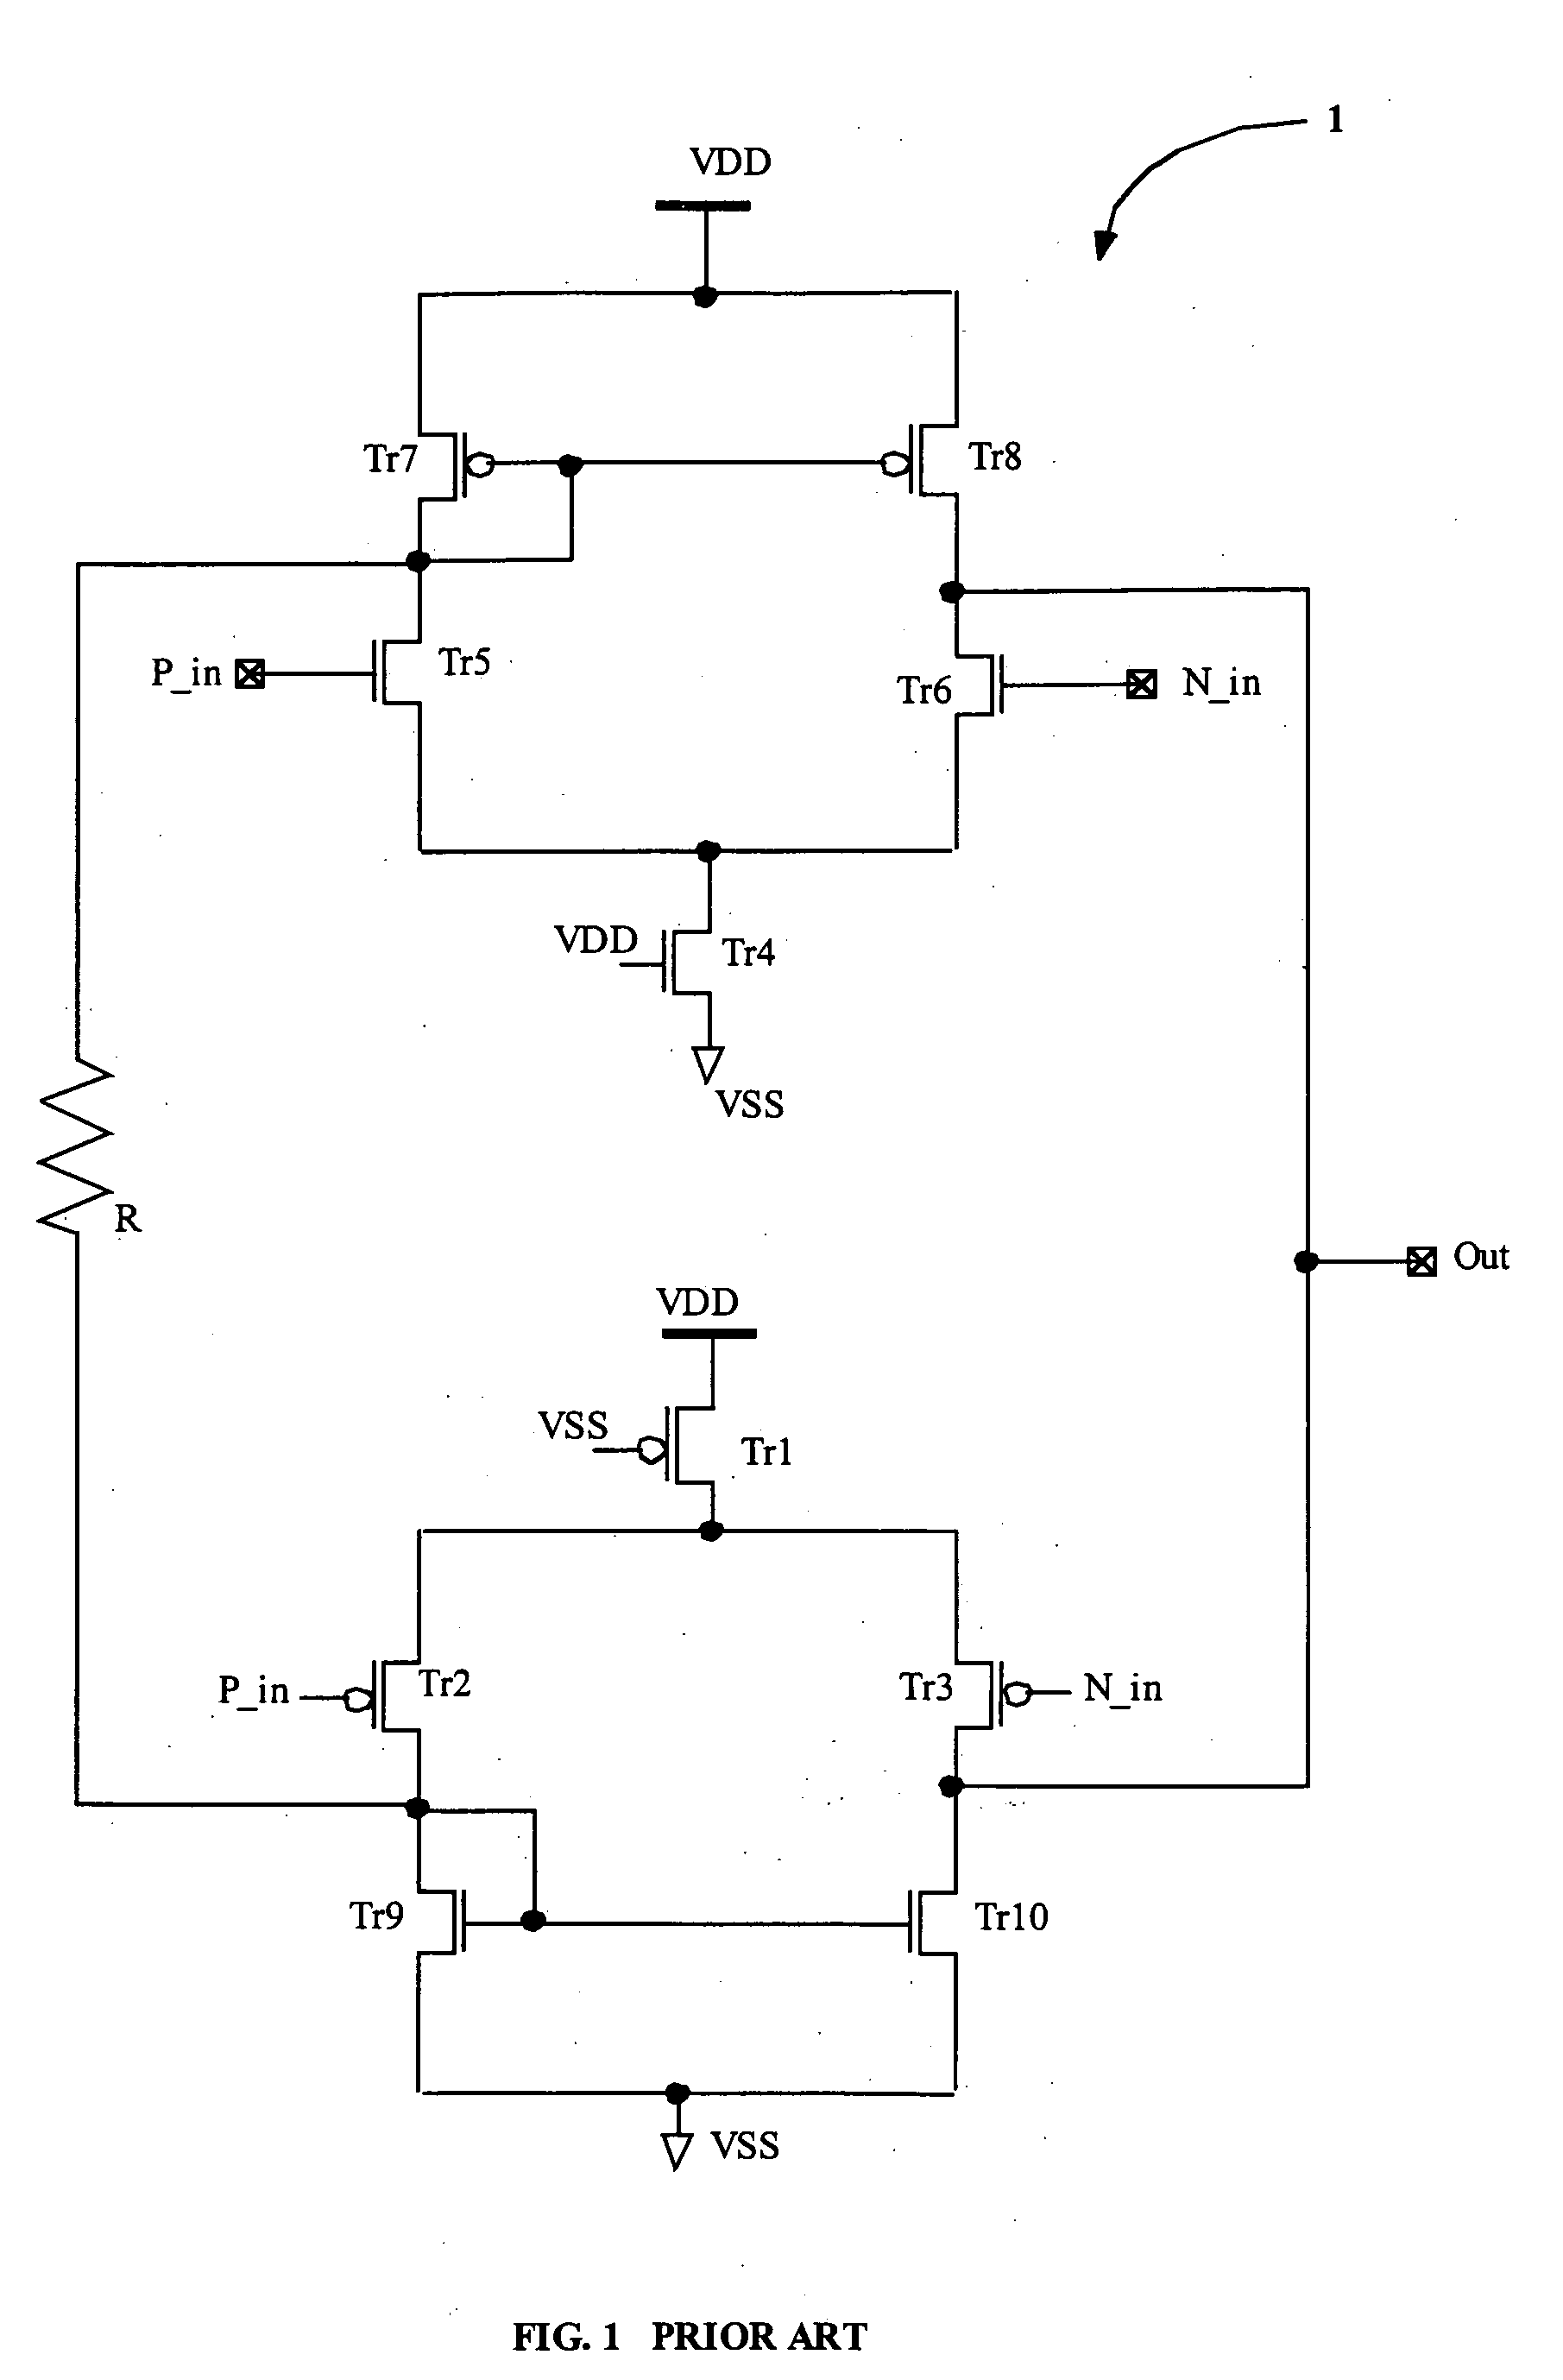 Differential input receiver